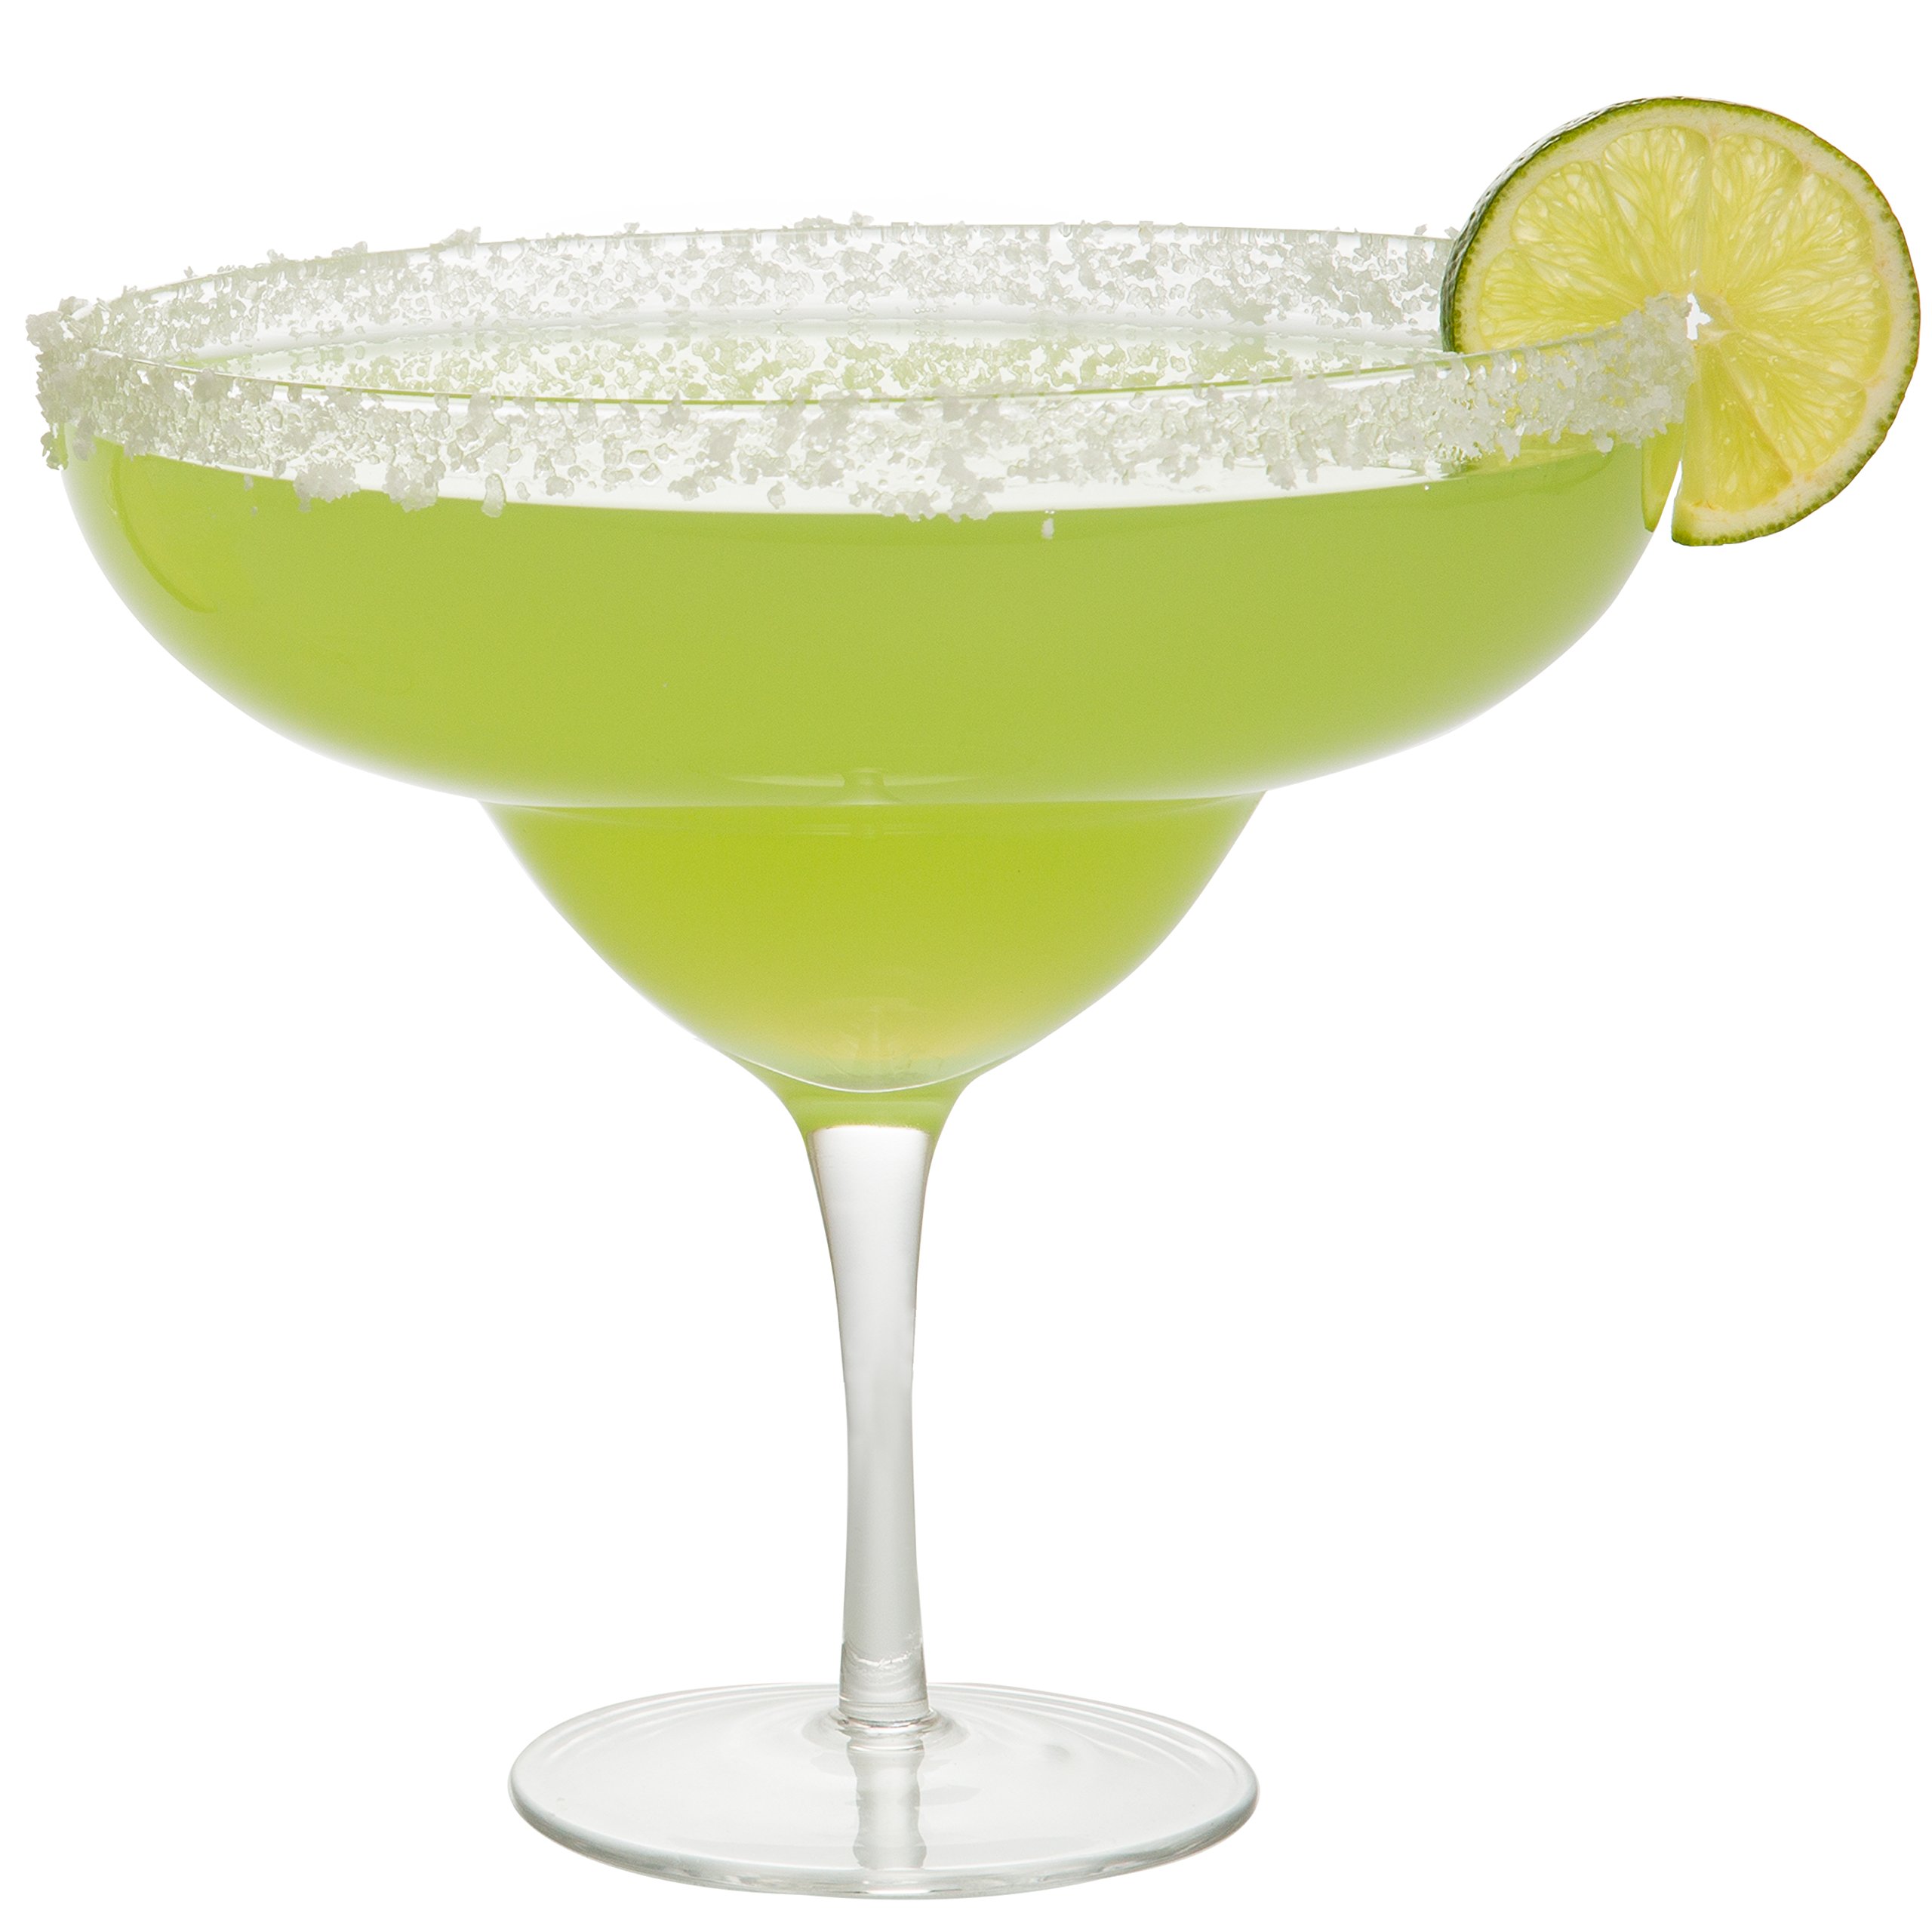 Extra Large Margarita Glasses 2 Pack - 33 oz per Giant Glass - Each Fits 3 Regular Margs - Fun for Tequila Lovers, 21st Birthdays & Mexican Dinner Night - Jumbo Drinking Glasses for Cocktail Parties